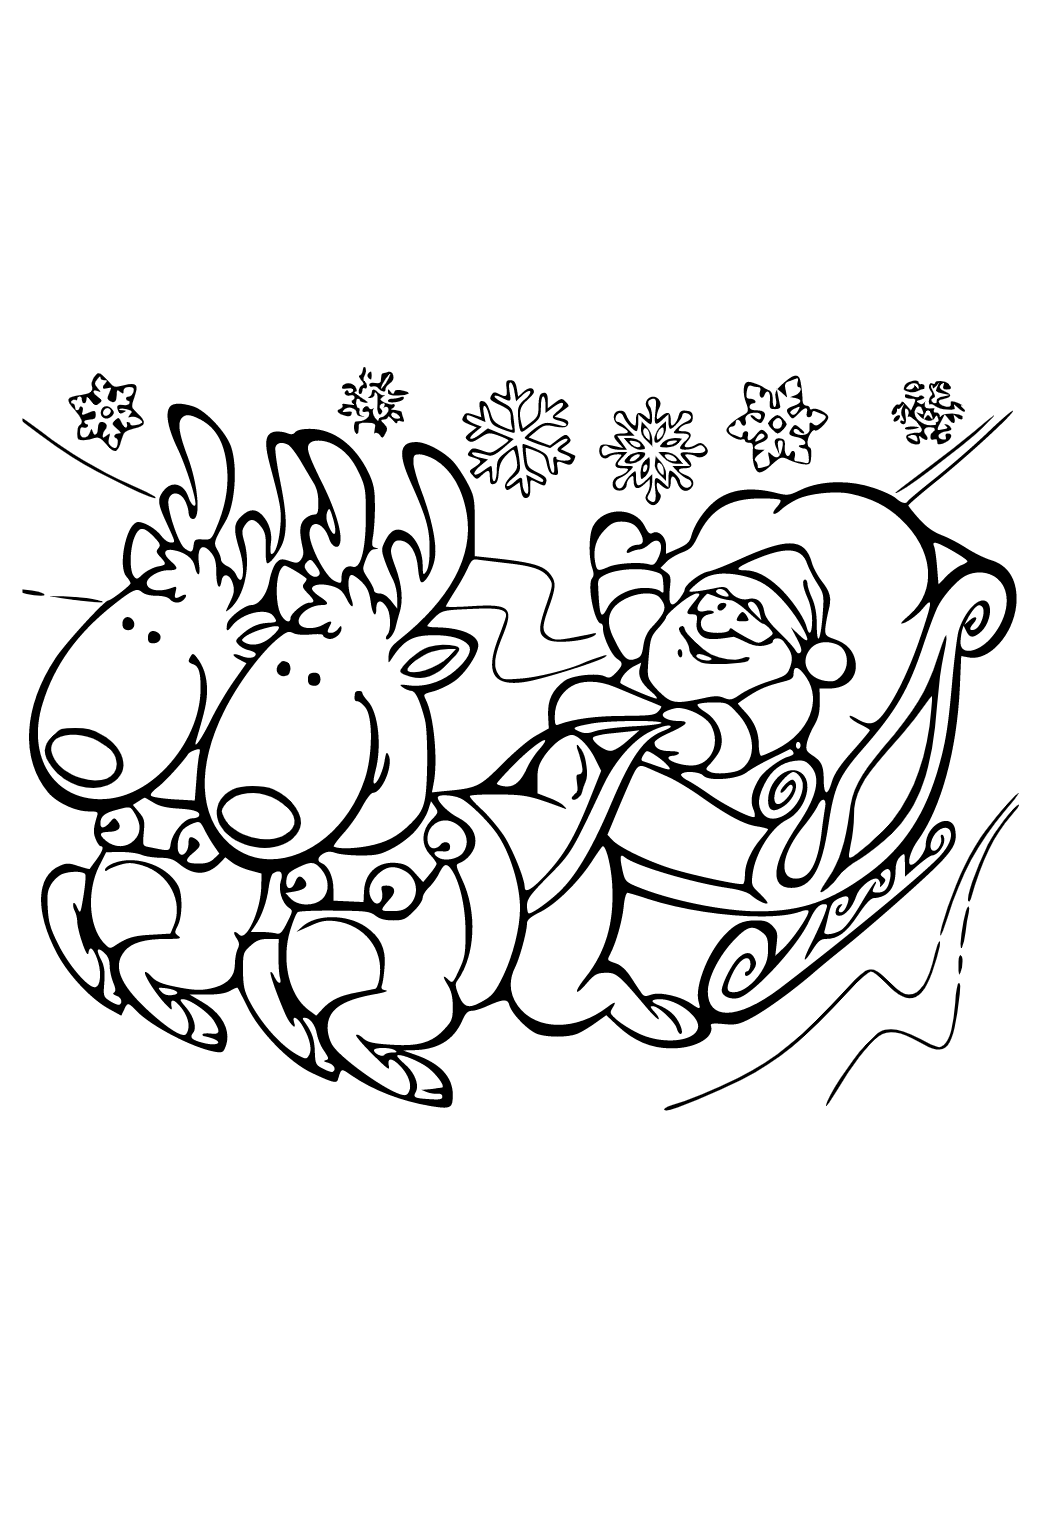 Free printable holiday sled coloring page sheet and picture for adults and kids girls and boys